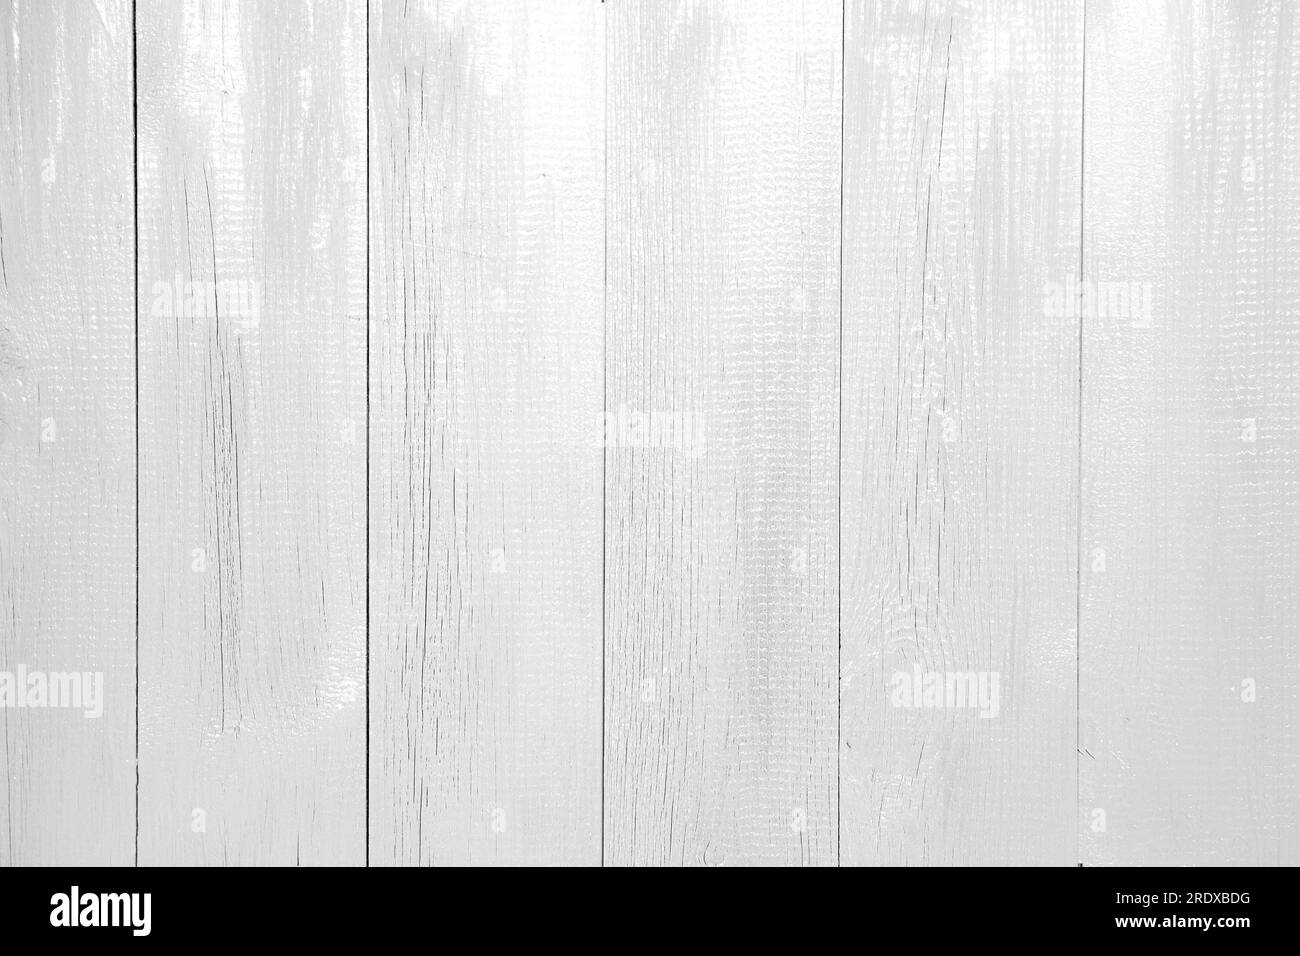 Texture of white wooden planks as background Stock Photo